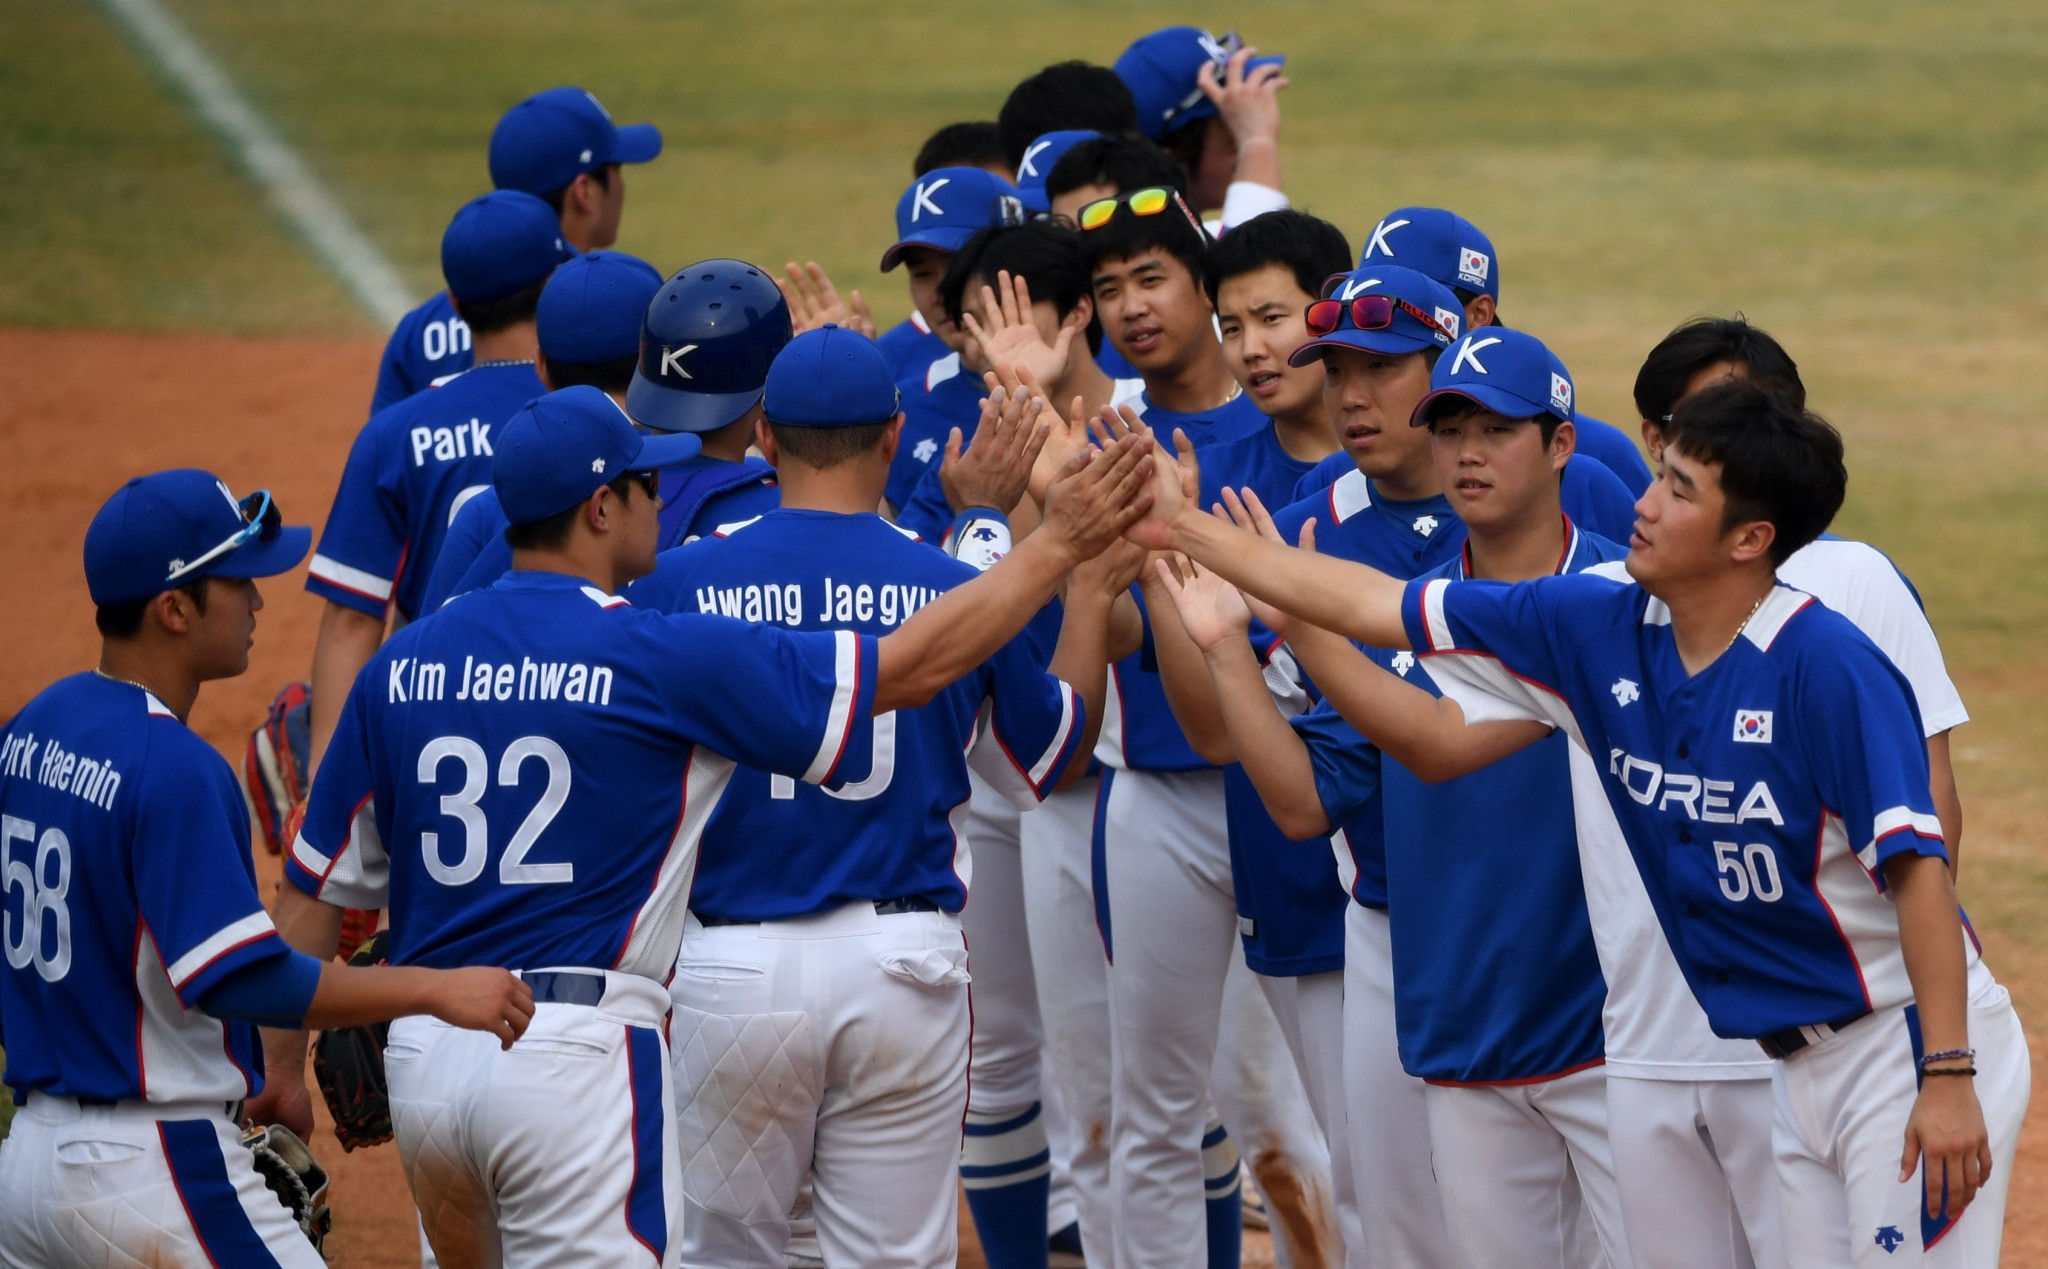 South Korea's baseball players will be hoping to atone for a difficult Olympics when they missed out on the medals ©Getty Images